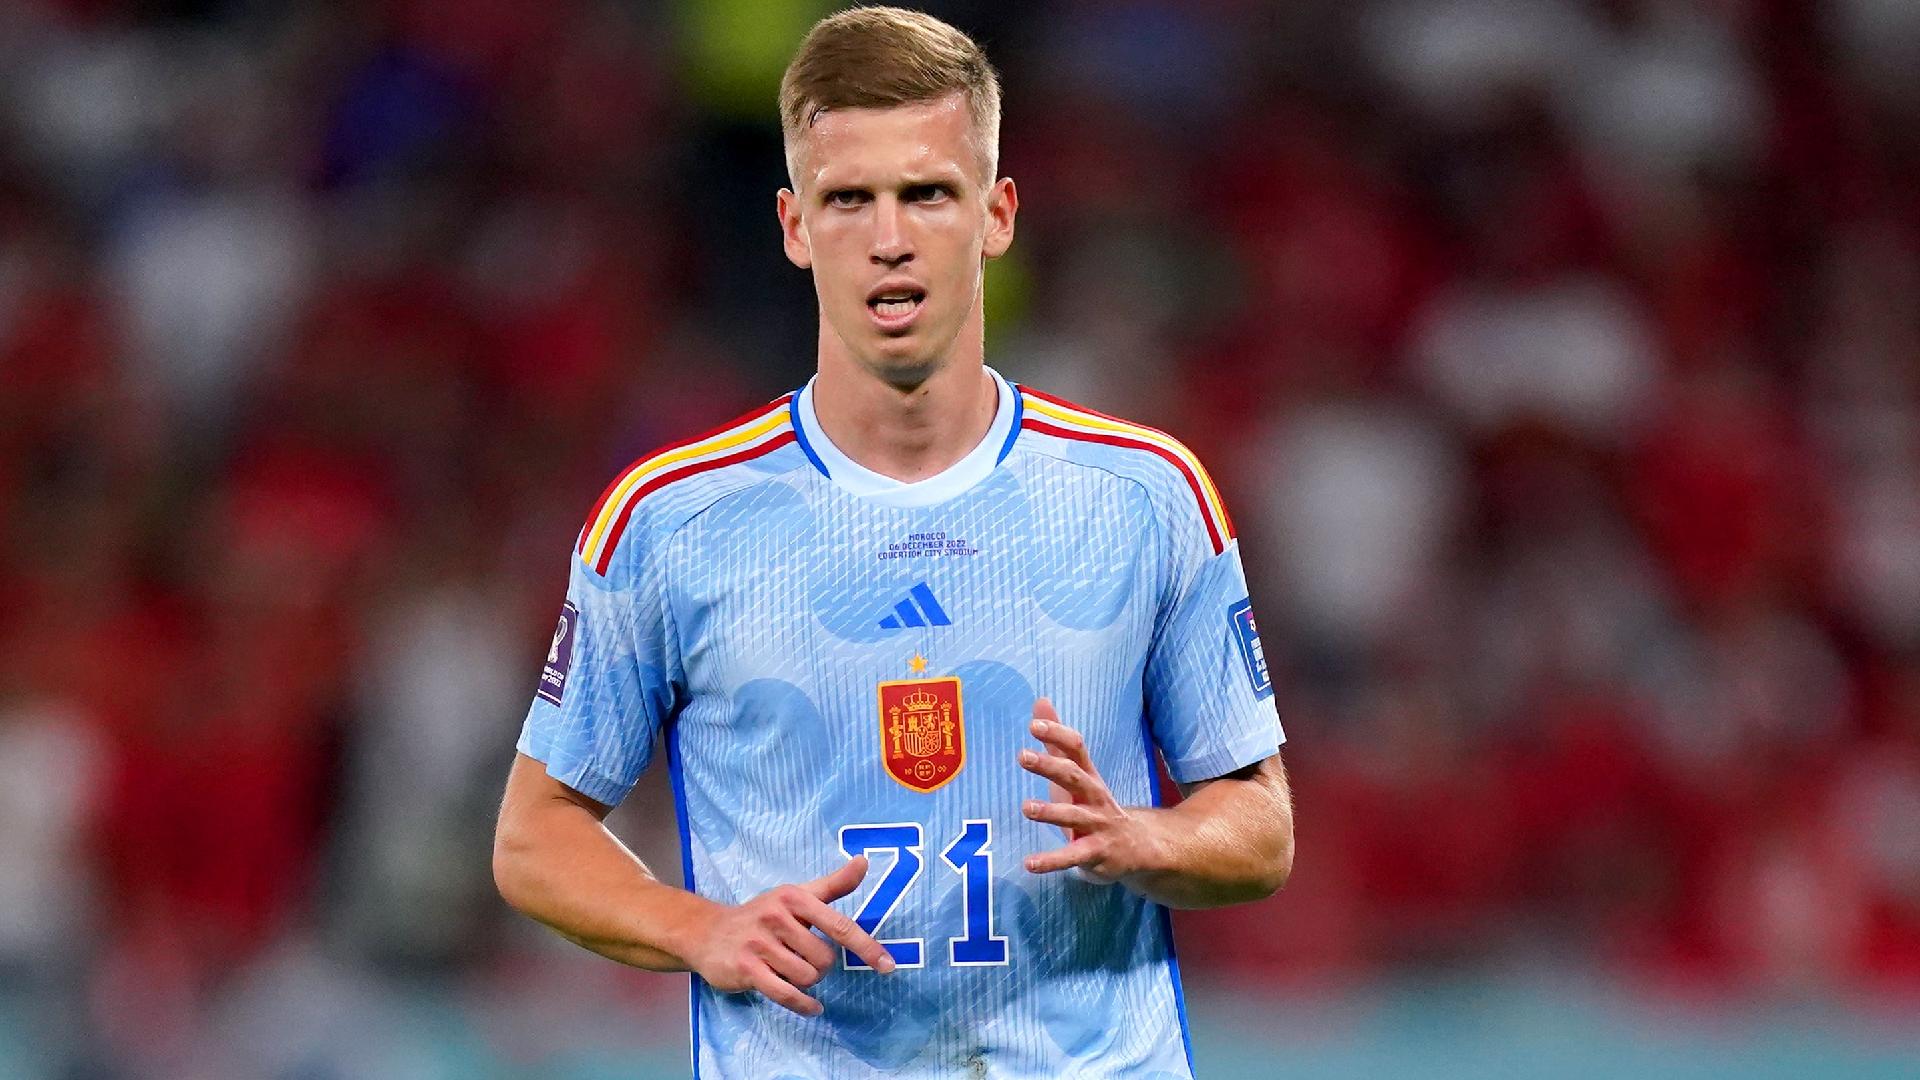 Football rumours: Manchester United join the pursuit of Dani Olmo